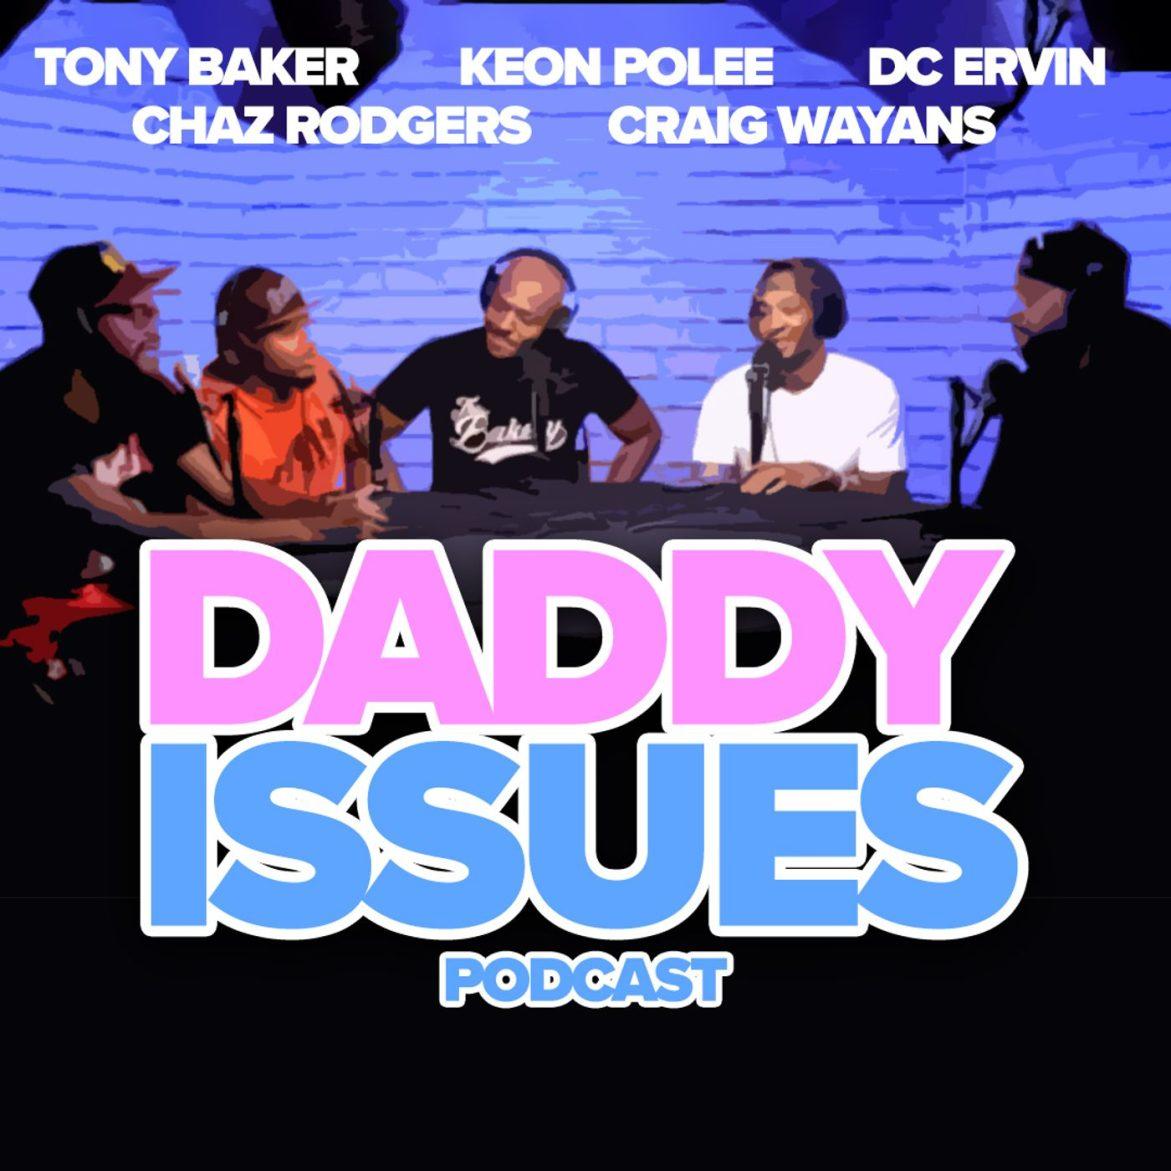 Black Podcasting - Daddy Issues: Looney Tunes